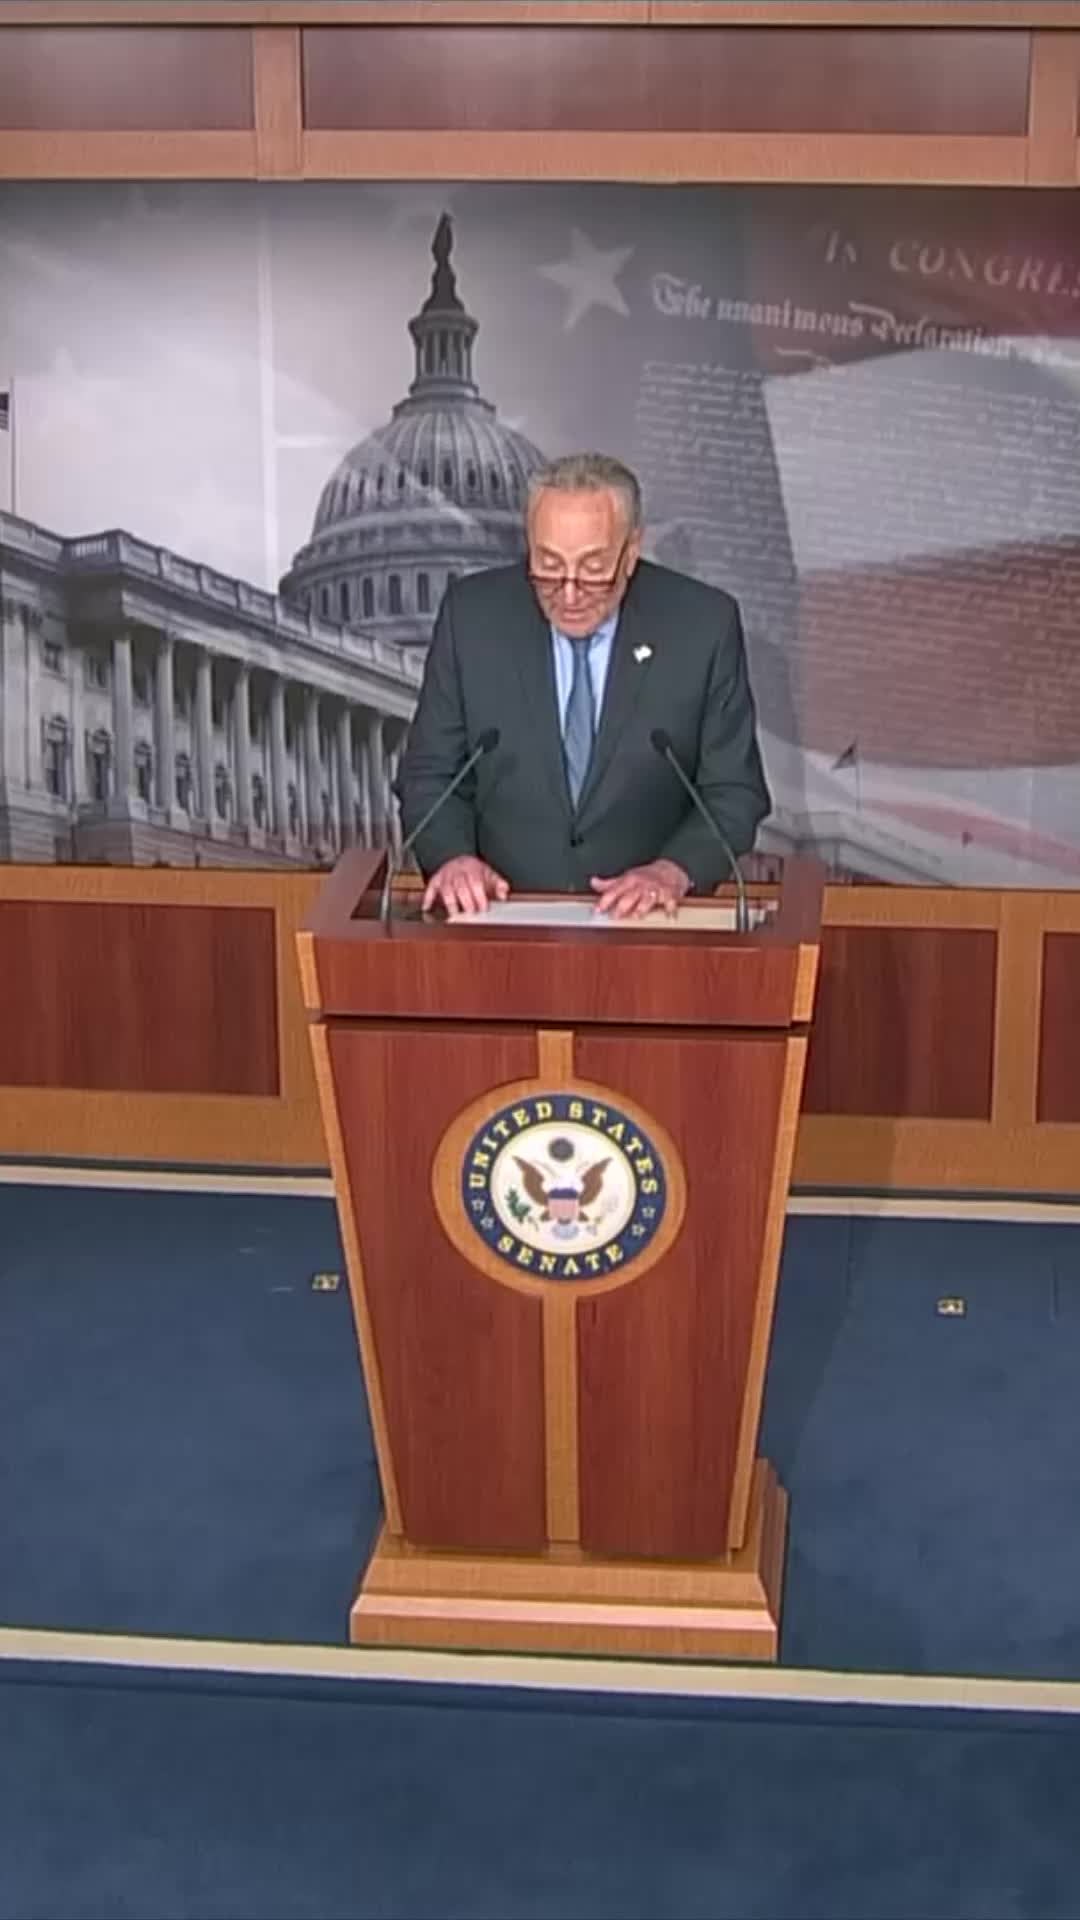 Senate Majority Leader Chuck Schumer (D-NY) on Wednesday defended his decision to dismiss the articles of impeachment against Homeland Security Secretary Alejandro Mayorkas without holding a full trial, arguing that he should never have been impeached in the first place.   “What we saw today was a microcosm of this impeachment since day one: hollow, frivolous, political,” he said. “And we felt very strongly that we had to set a precedent that impeachment should never be used to settle policy disagreements.”   Senate Republicans had urged the majority leader to allow for a full trial, arguing it would set a dangerous precedent and amounted to the Senate shirking its constitutional duty.   “We